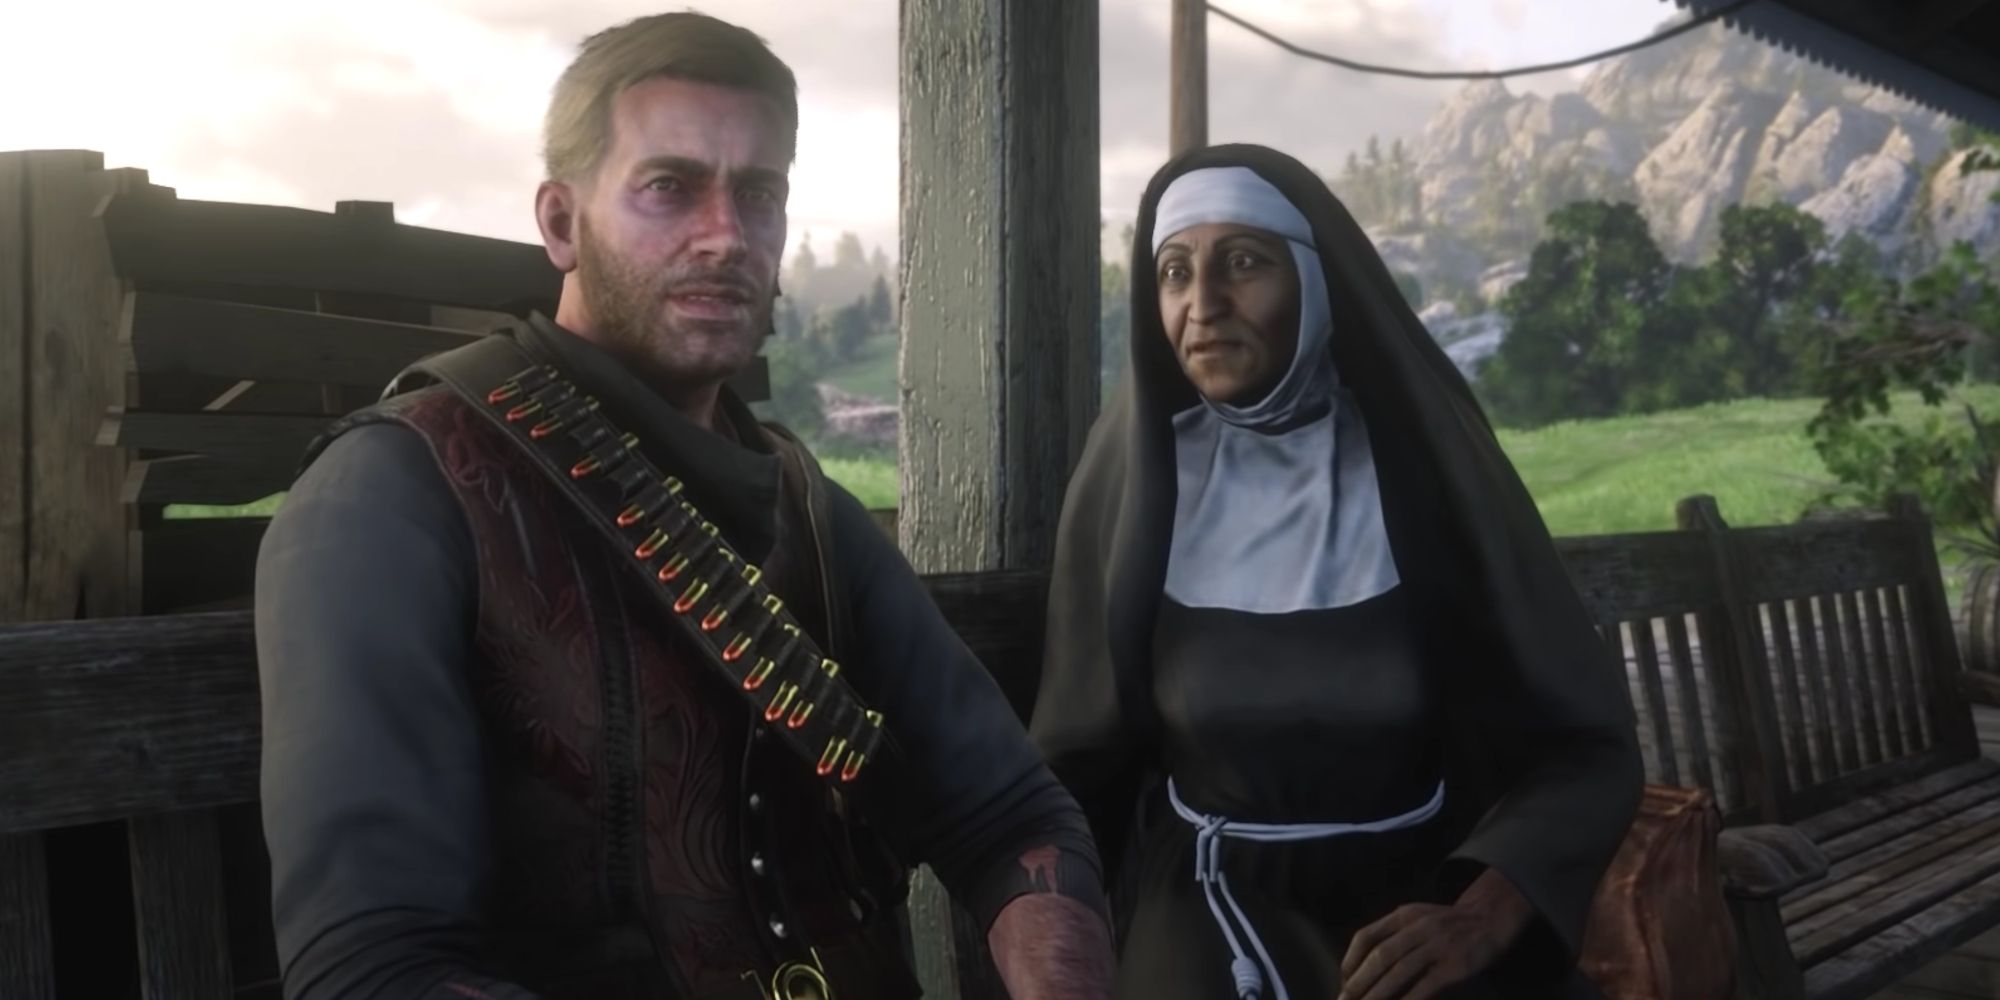 With a serious expression on his face, Arthur looks away from Sister Calderon and tells her about his life at the train station,